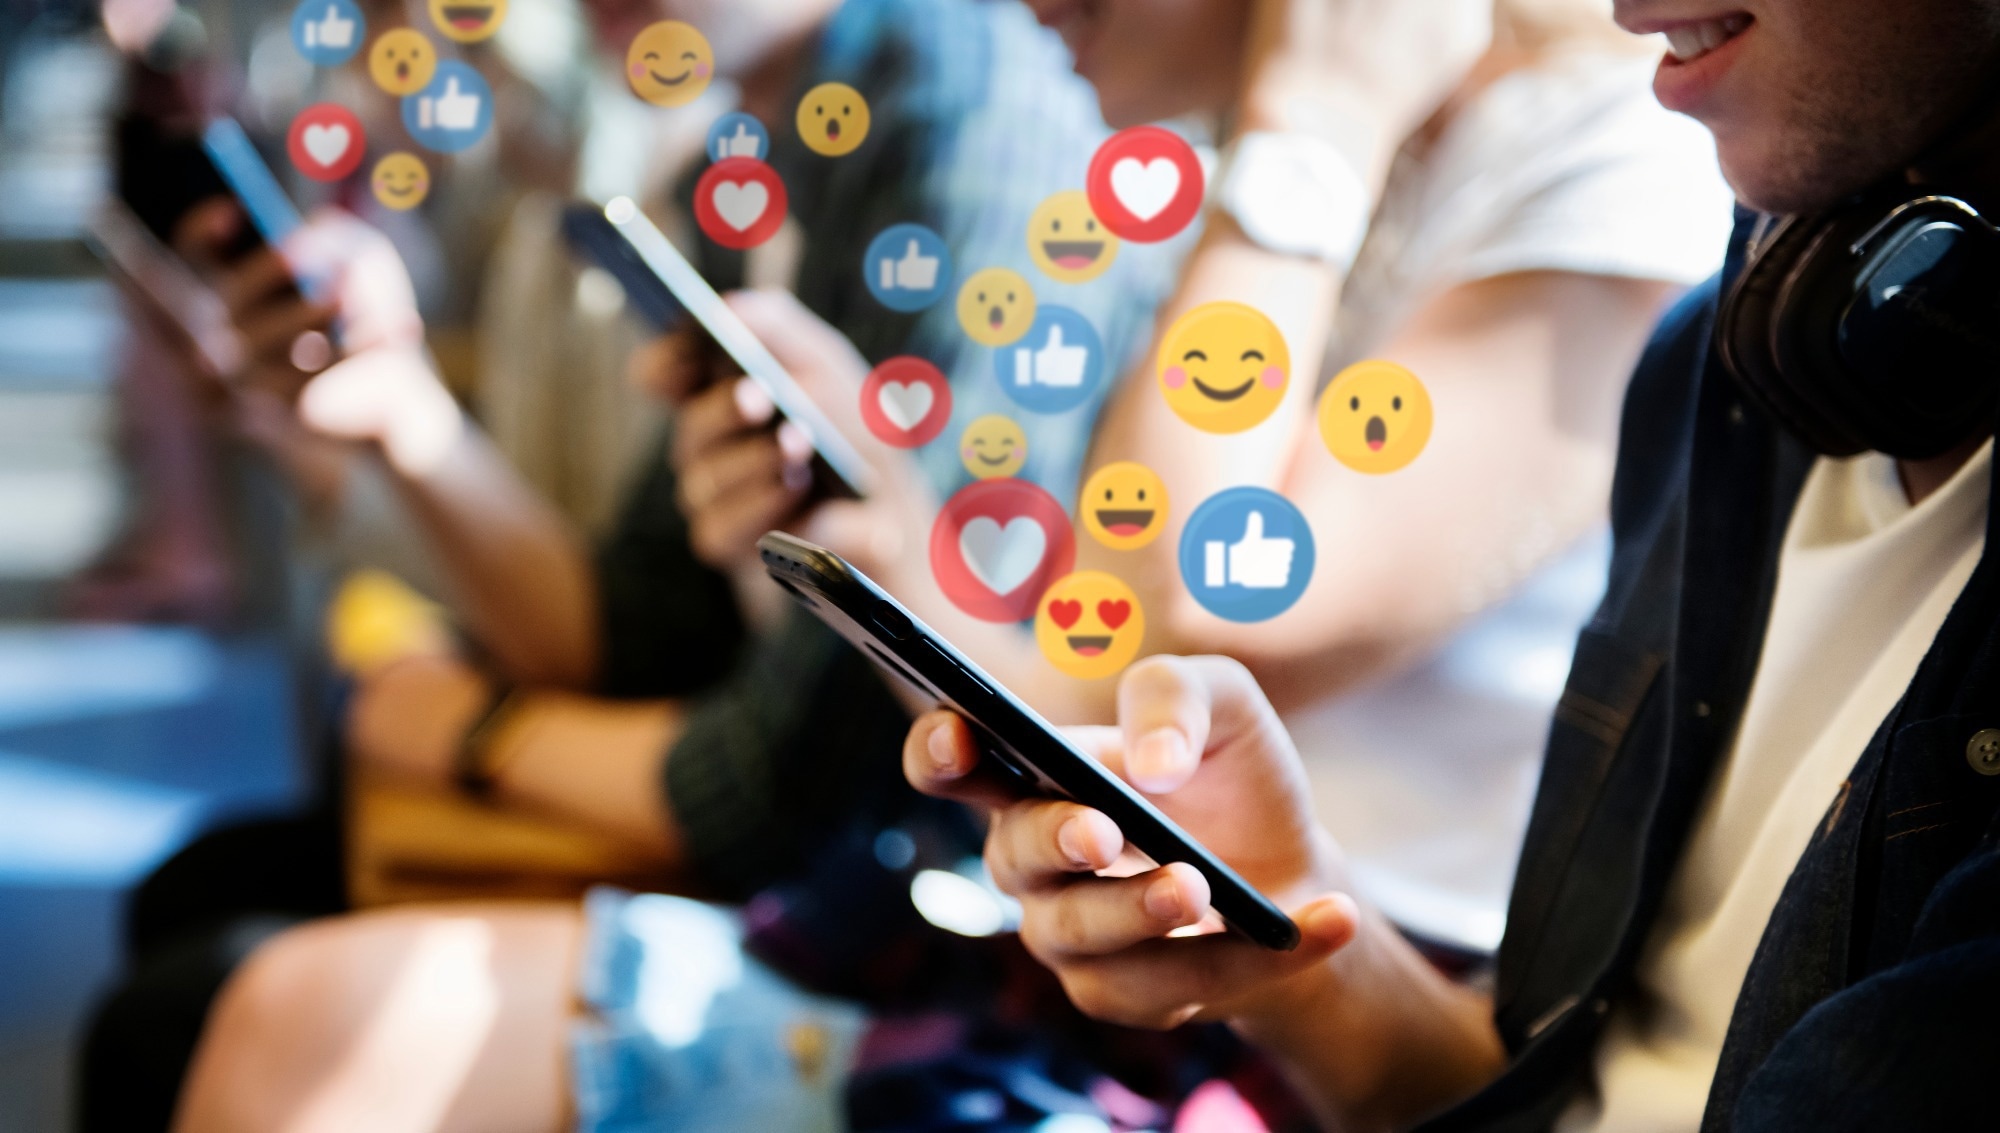 Study: Healthy Social Network Use and Well-Being during Adolescence: A Biopsychosocial Approach. Image Credit: Rawpixel.com / Shutterstock